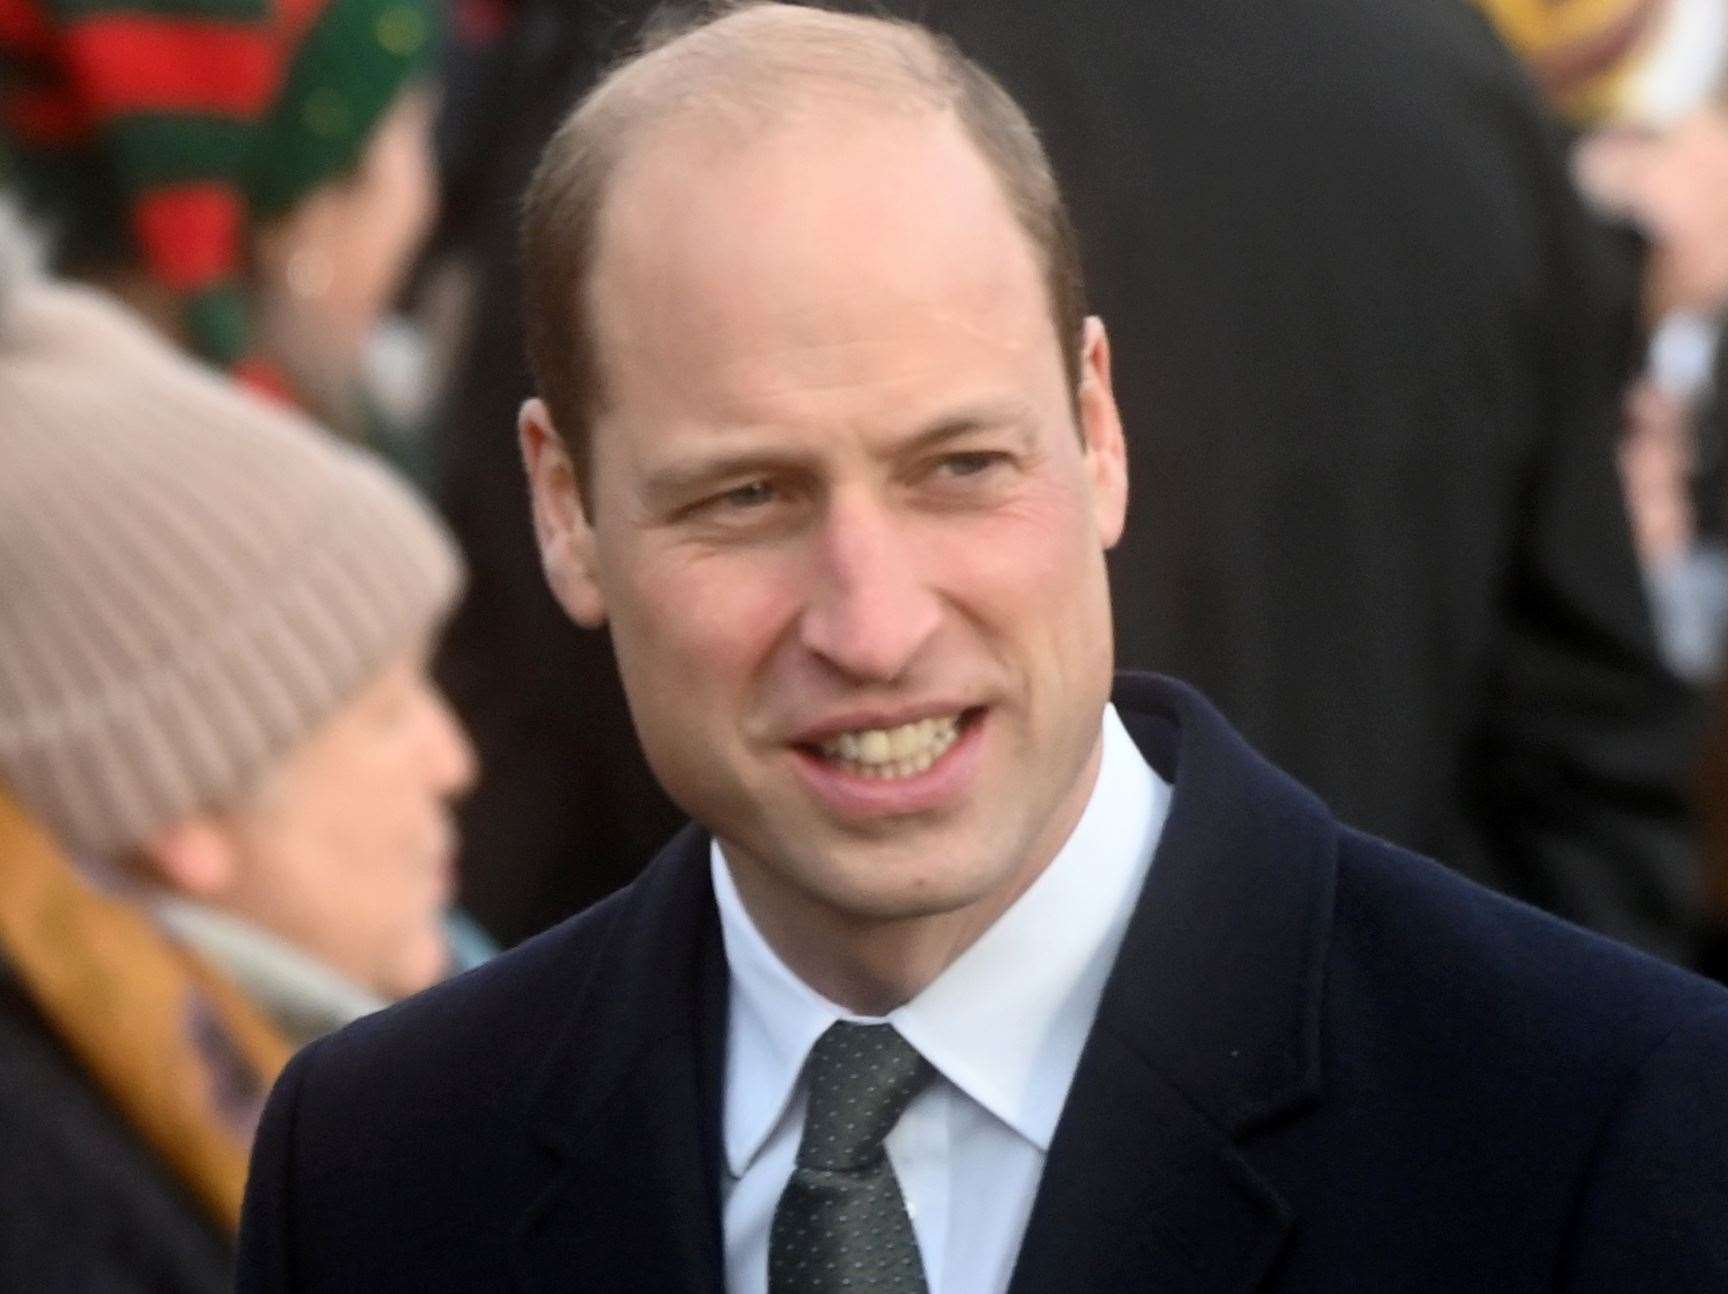 Prince William is now the head of the Duchy of Cornwall, which wants to develop the land into a sprawling housing estate